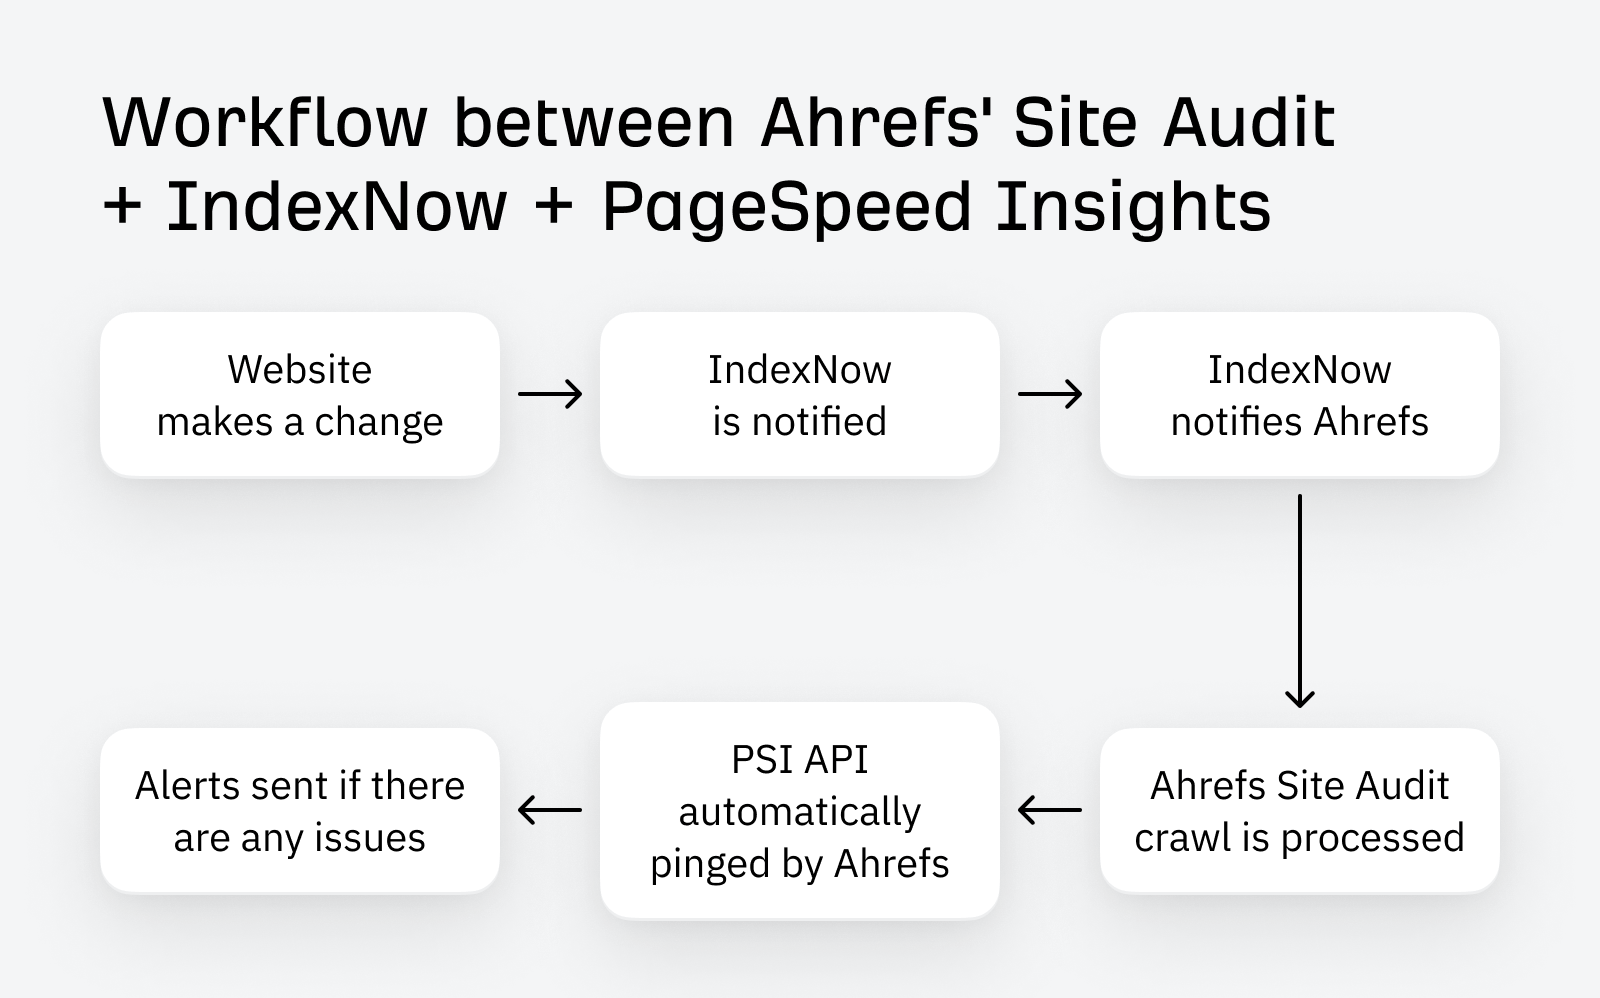 The workflow between Ahrefs' Site Audit, PageSpeed Insights API and IndexNow.